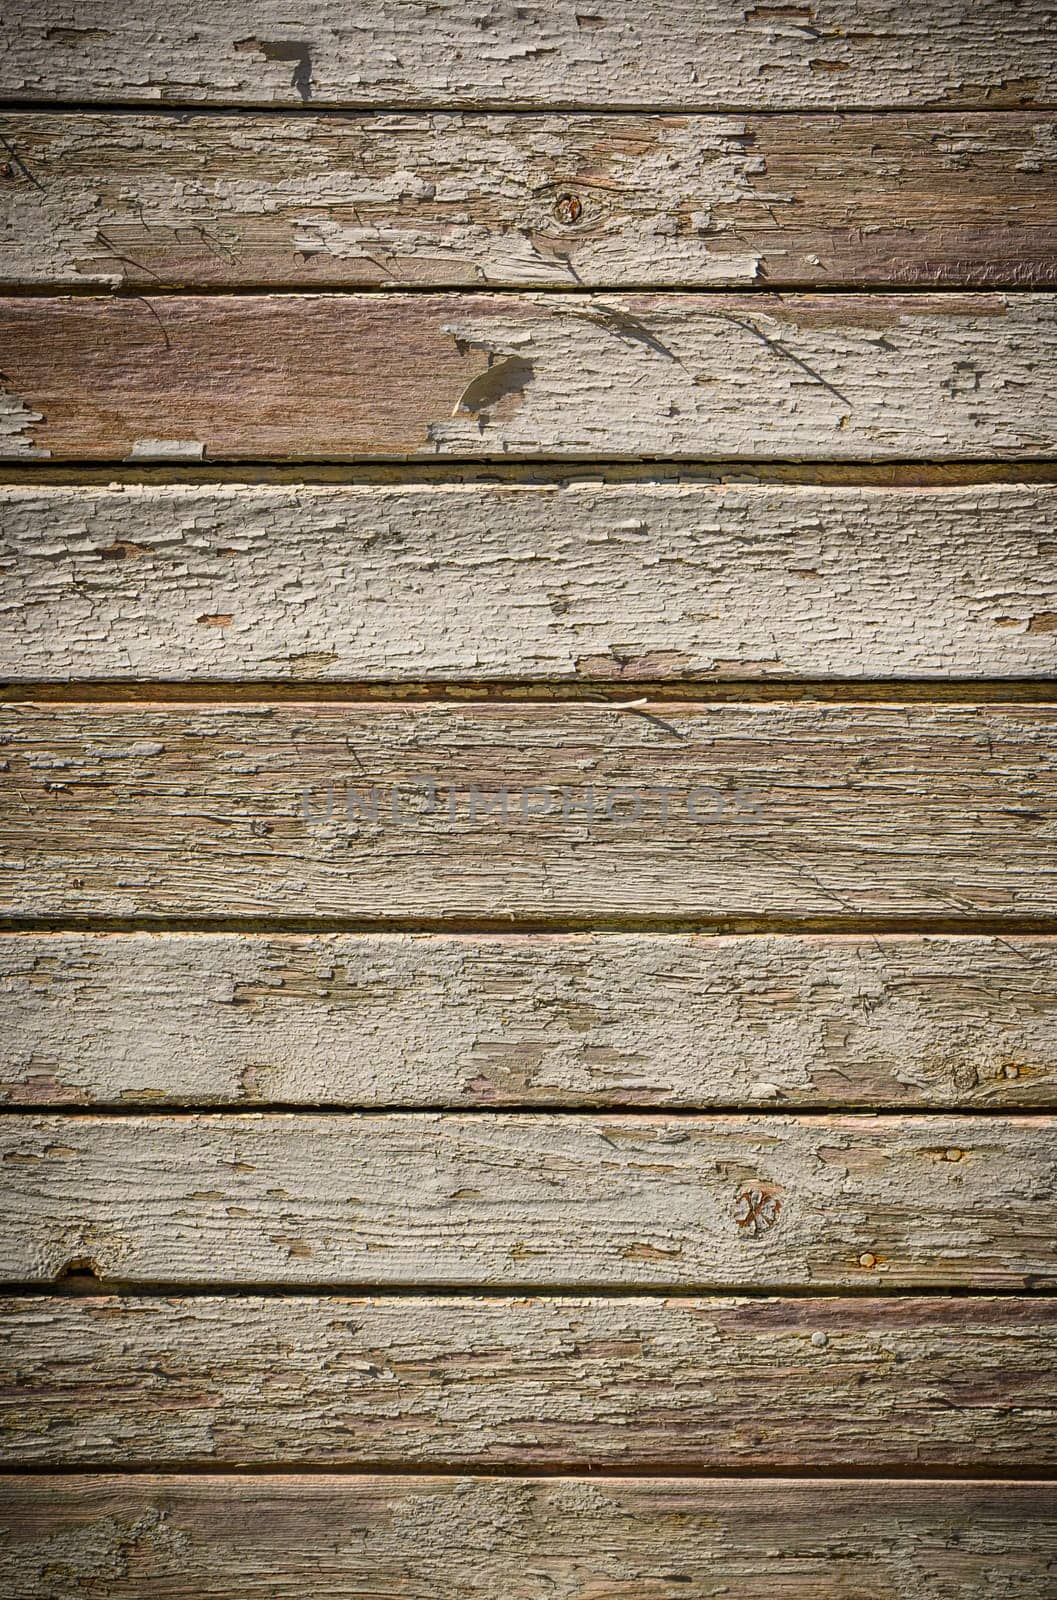 painted wood plank texture background. Vintage wooden board wall 1